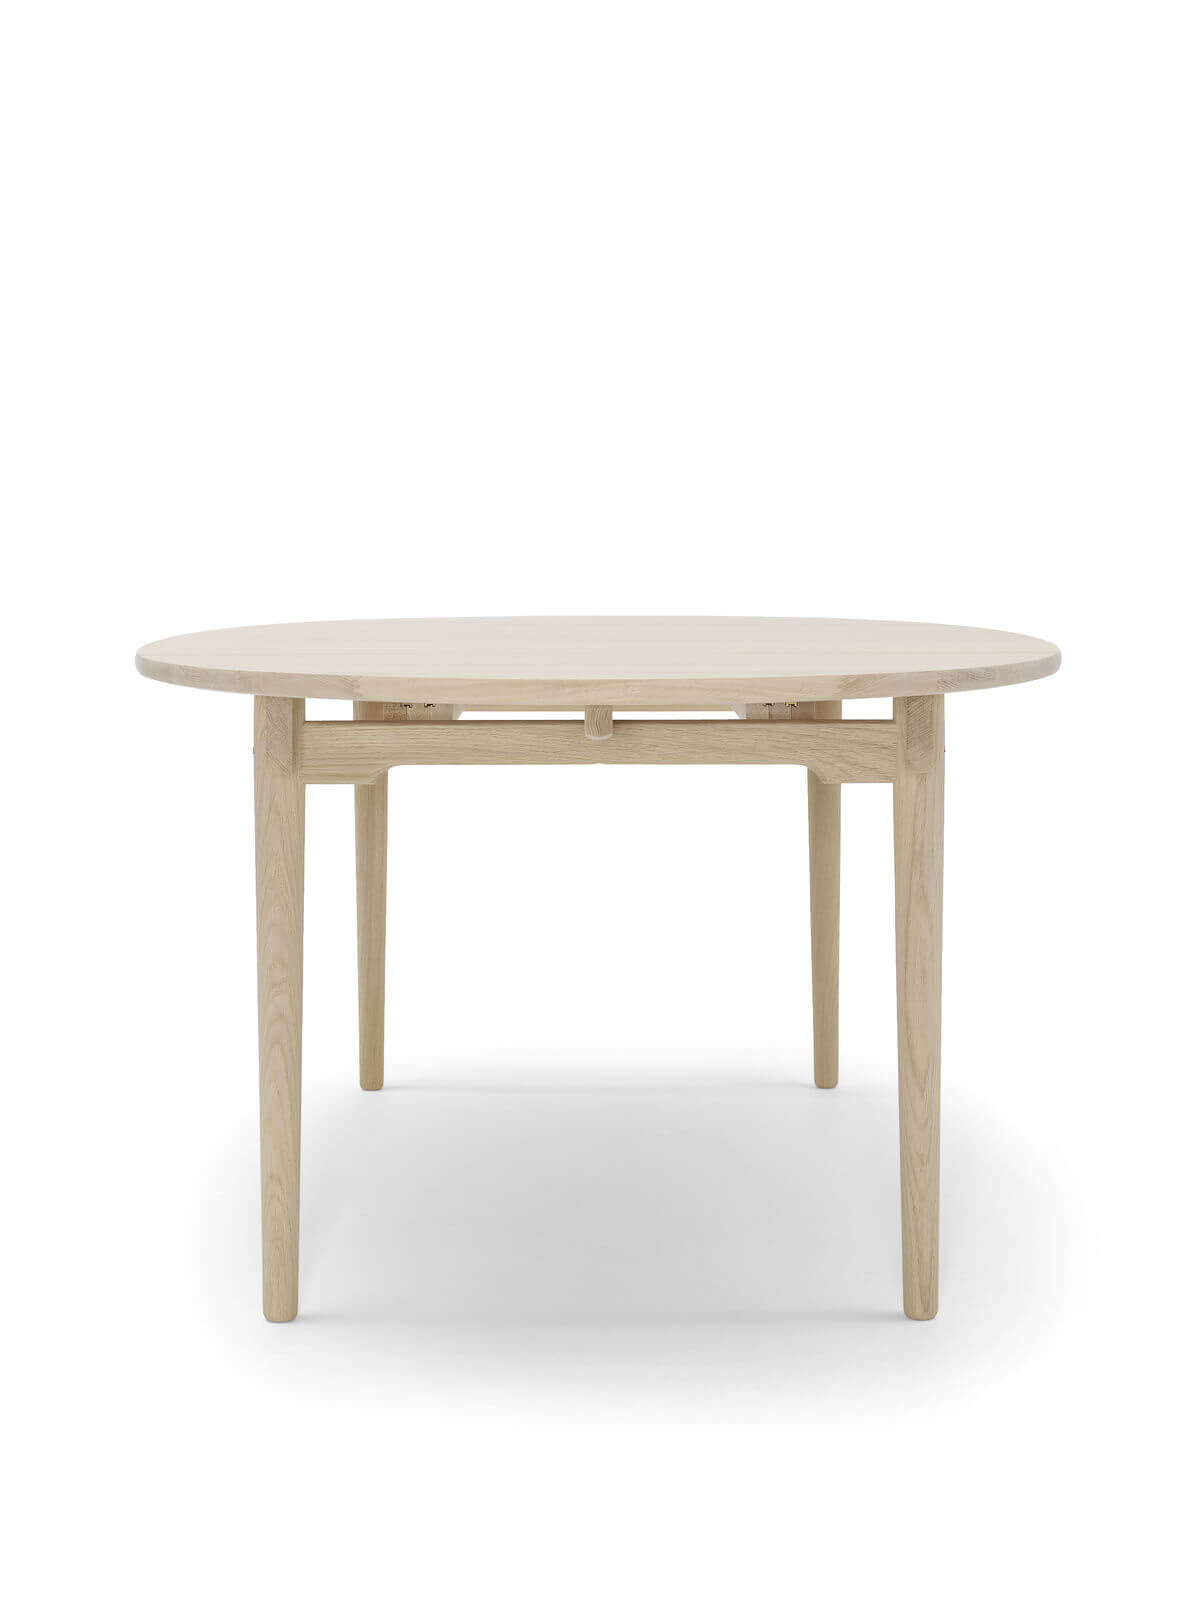 CH338 dining table